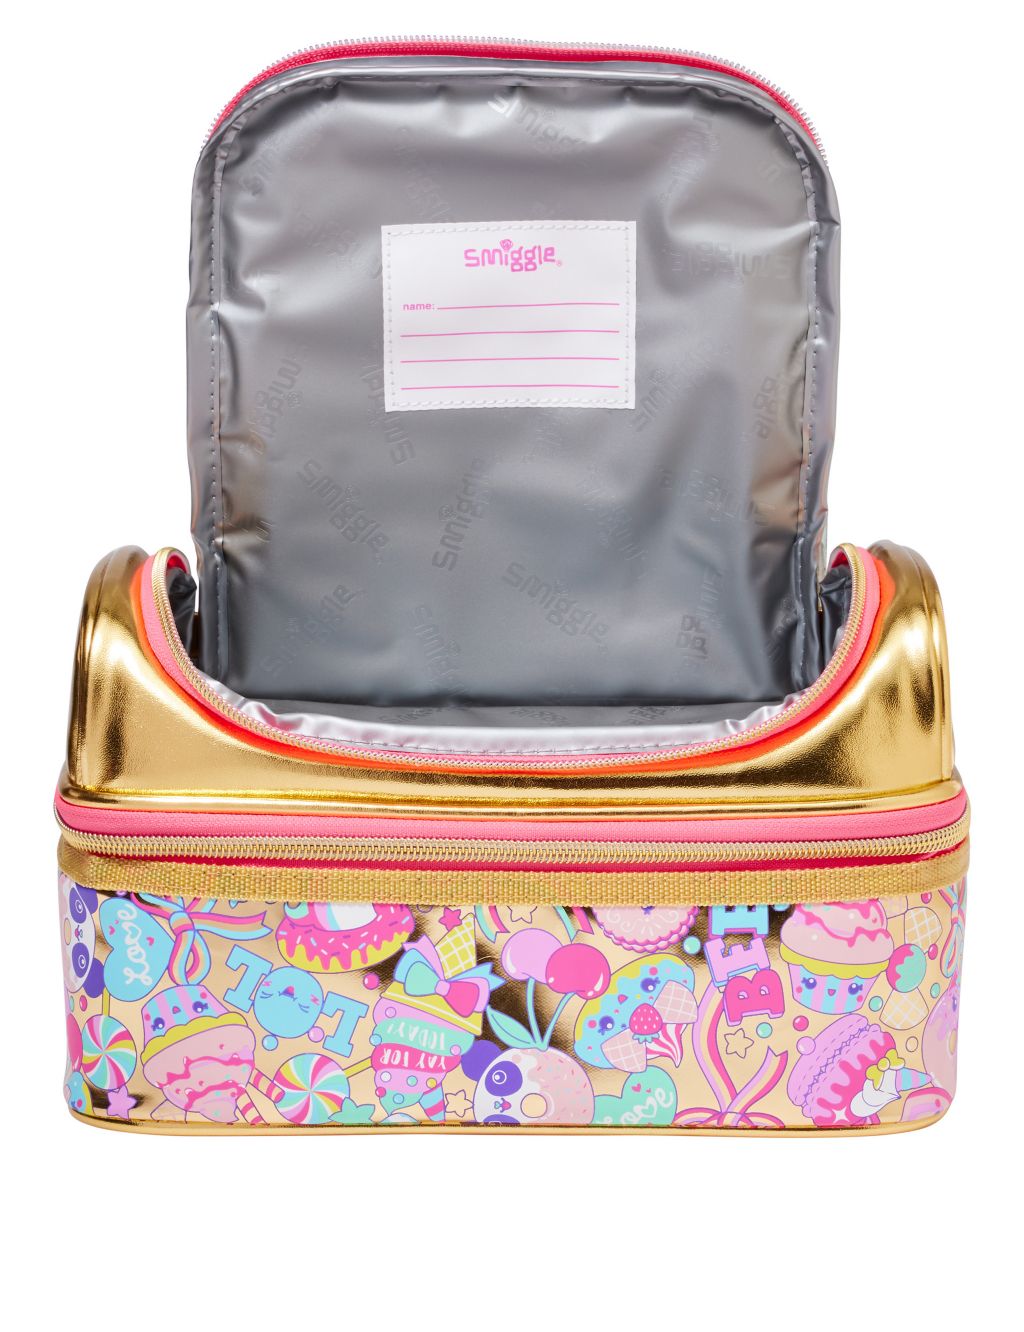 Kids' Patterned Lunch Box image 2